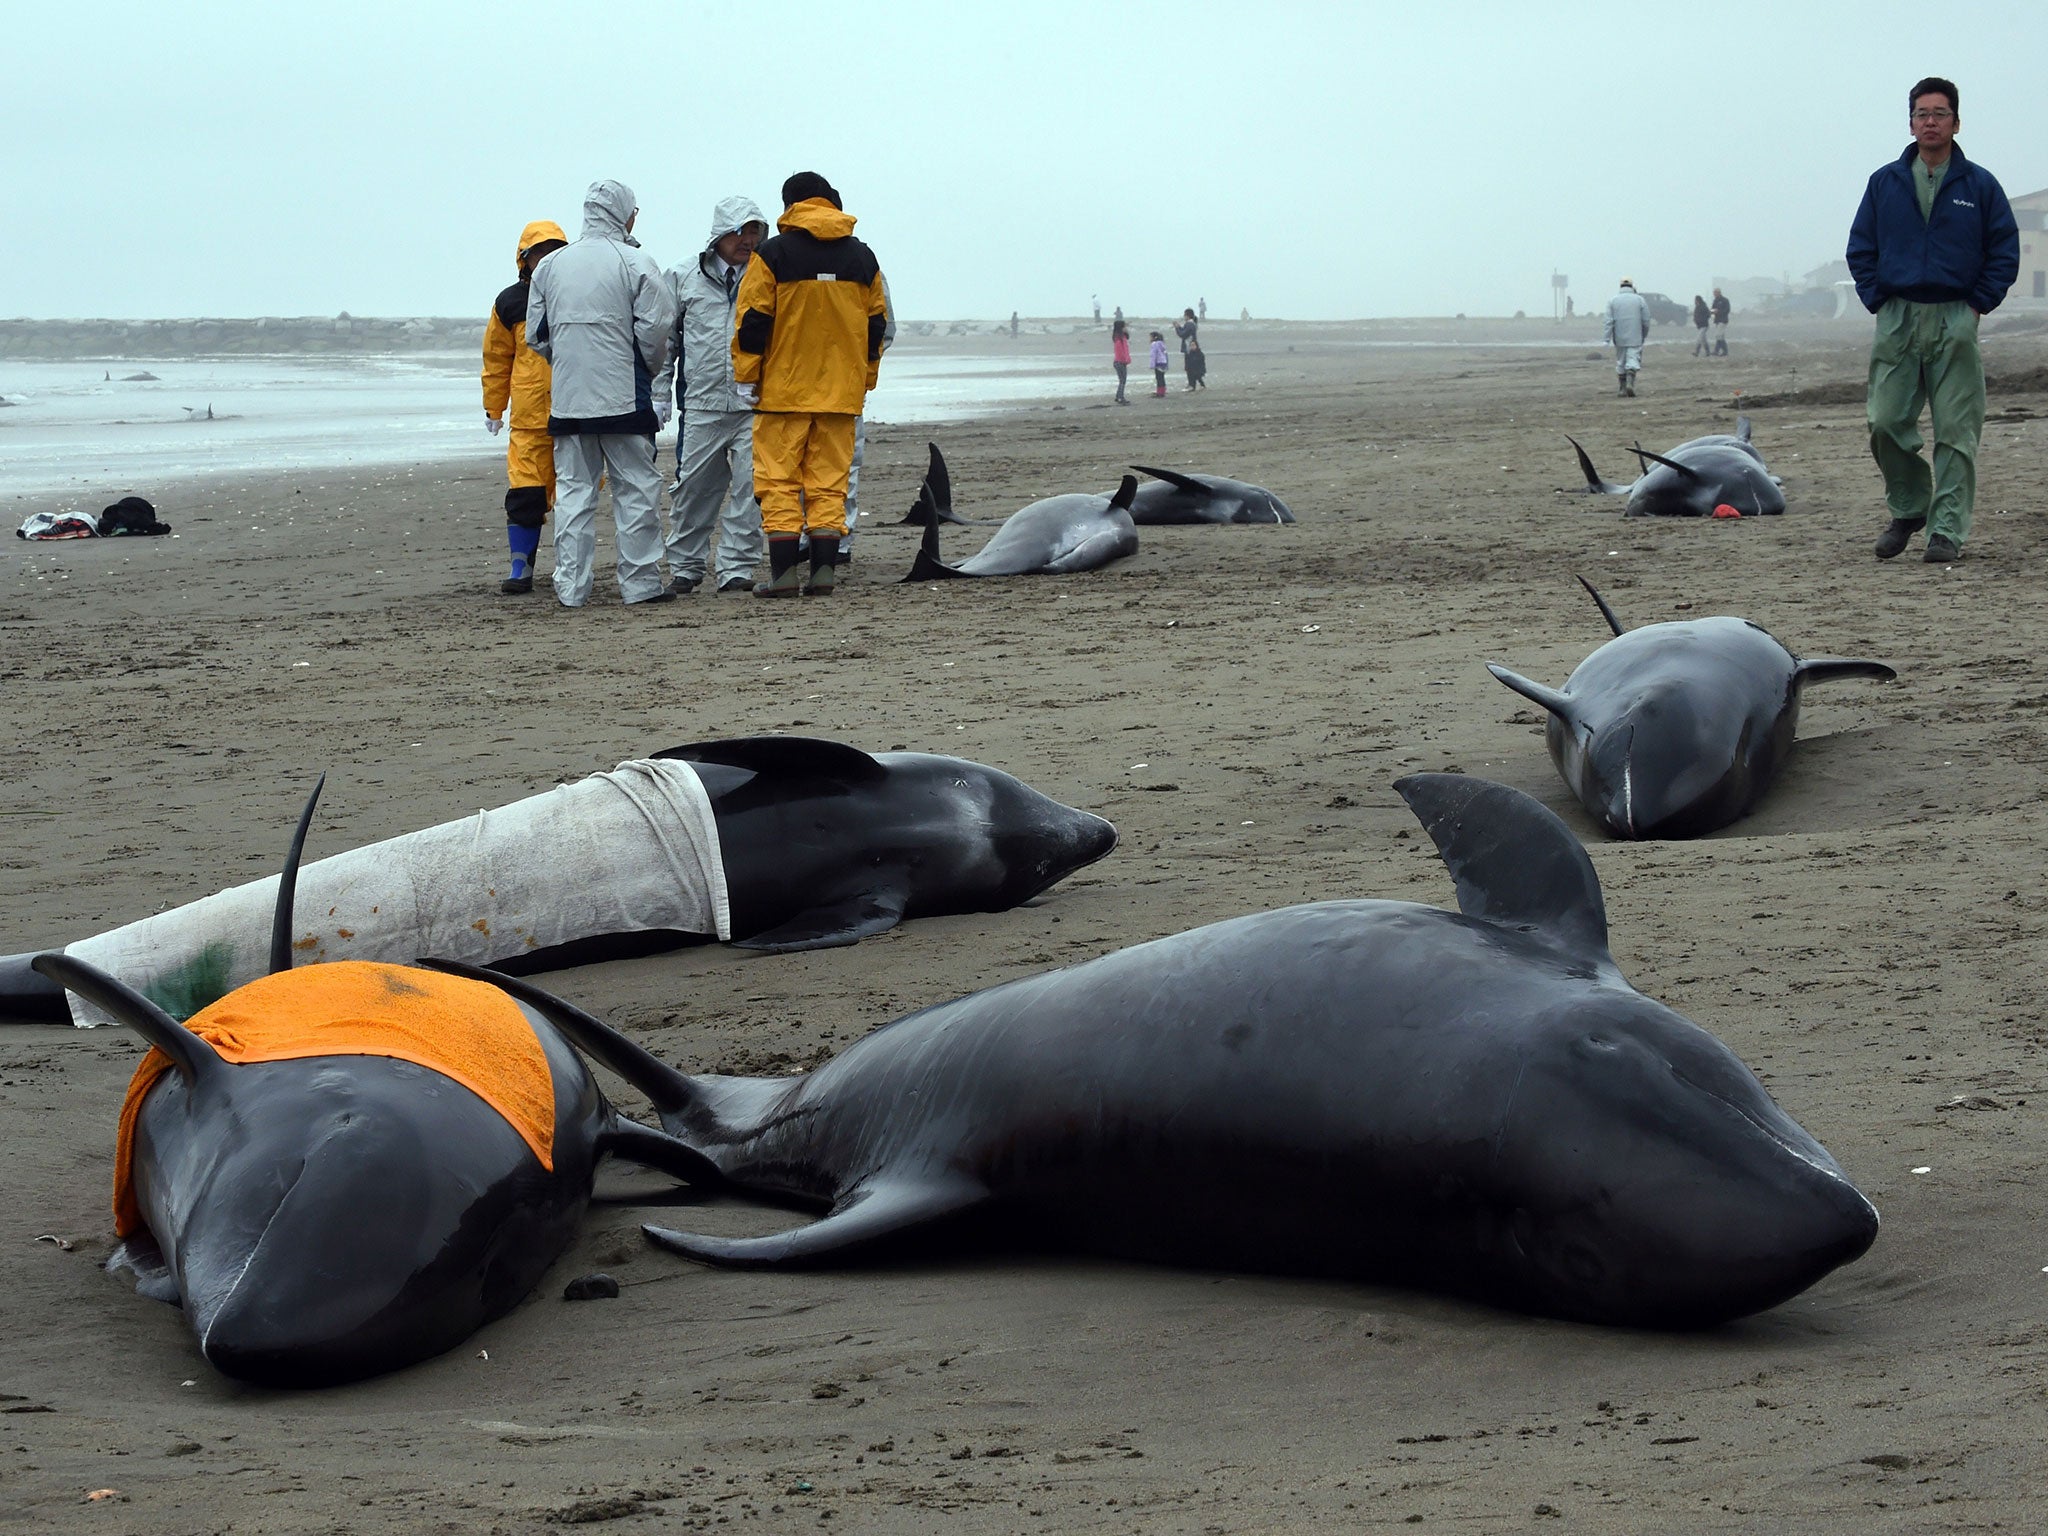 More than 140 dolphins found themselves stranded on beach in north-east of Tokyo